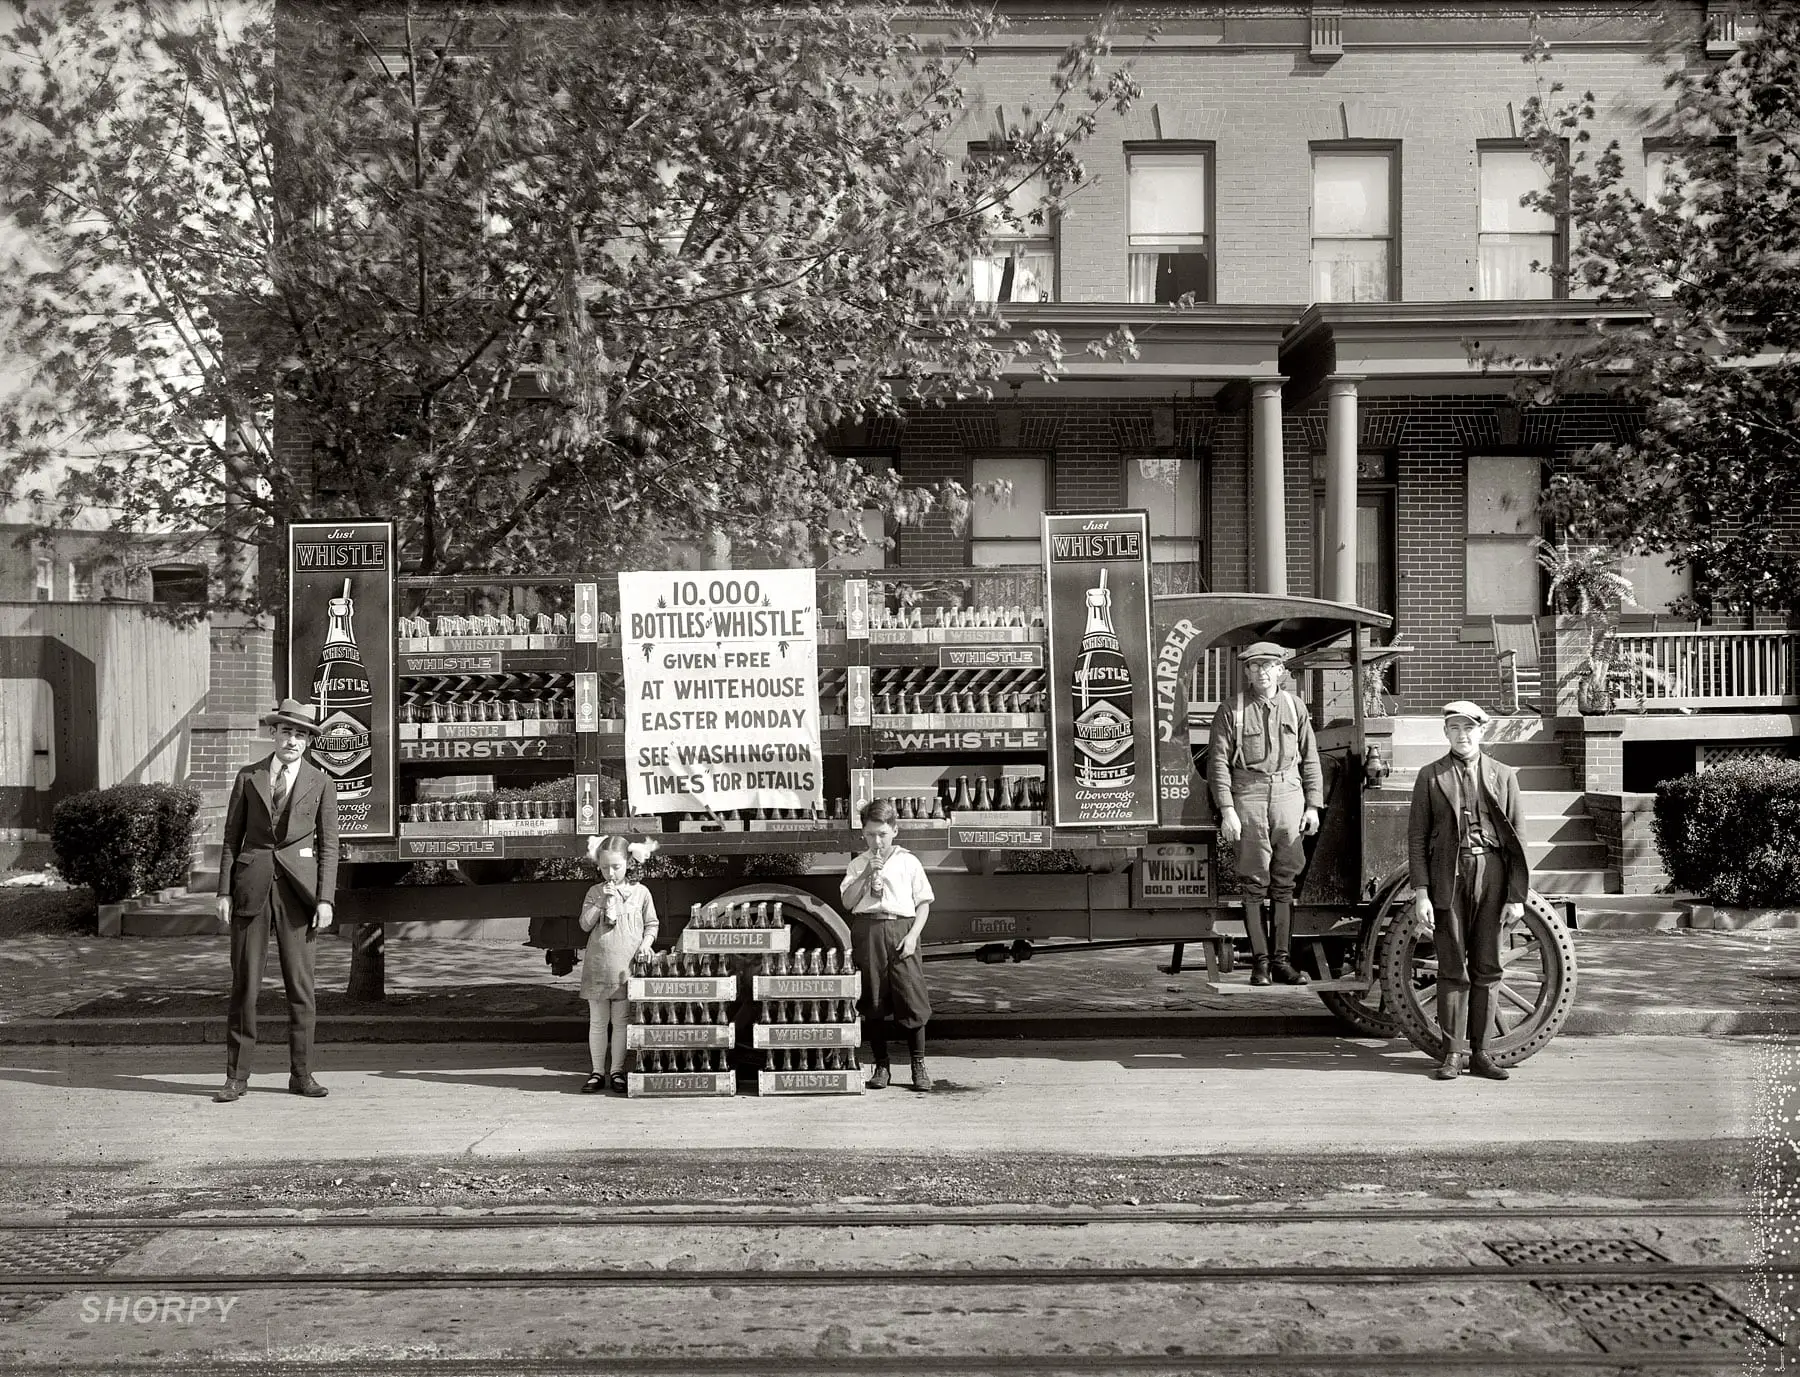 Washington, D.C., 1921. "Whistle car." A truck filled with Whistle, the "beverage wrapped in bottles." National Photo Company glass negative.